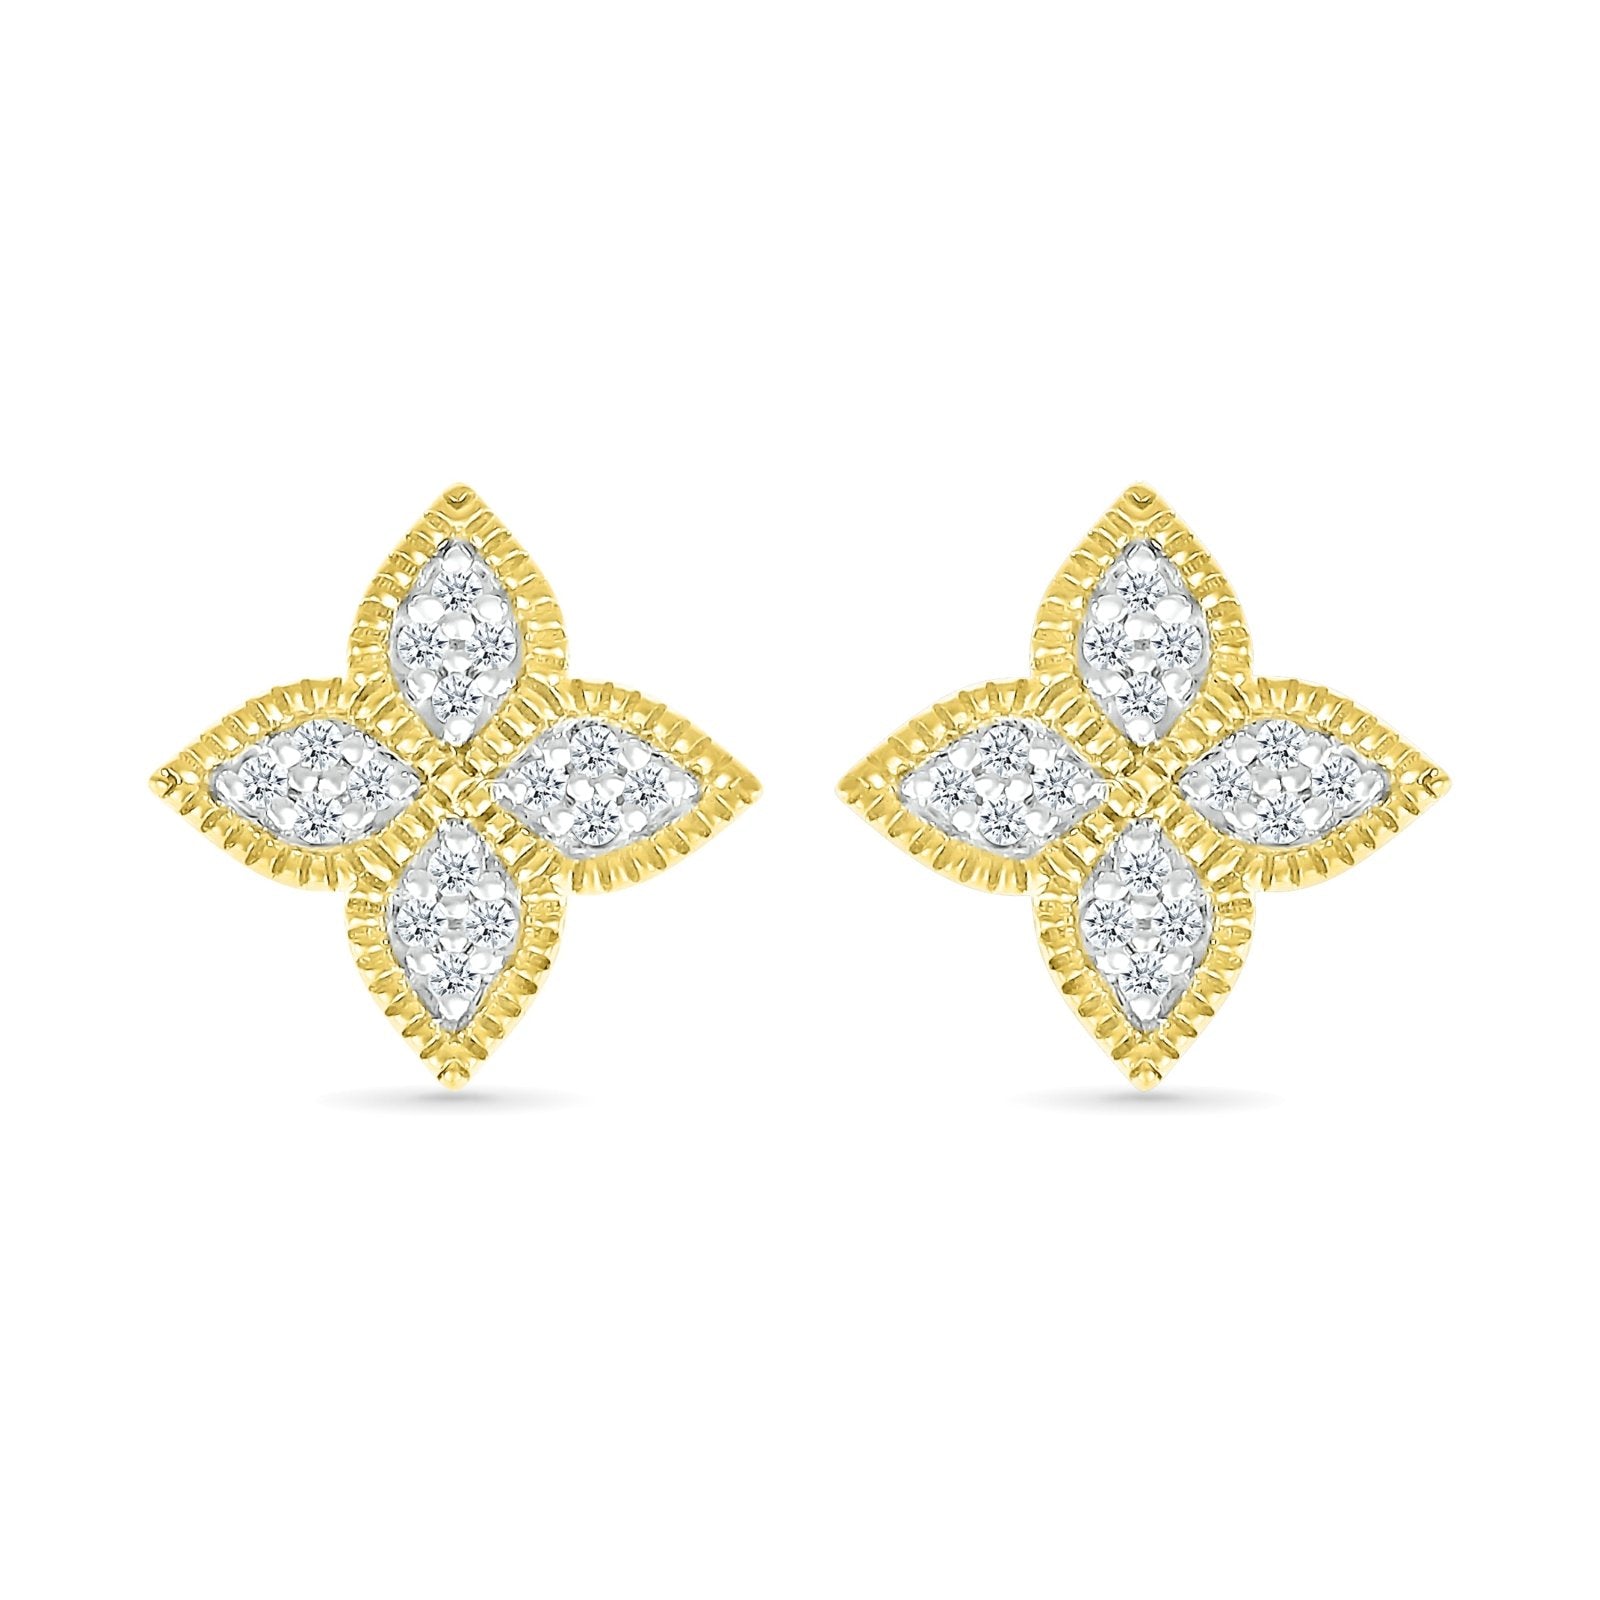 Diamond Clover Studs in Braided Gold Earrings Estella Collection #product_description# 32666 Diamond Made to Order Traditional Stud #tag4# #tag5# #tag6# #tag7# #tag8# #tag9# #tag10#